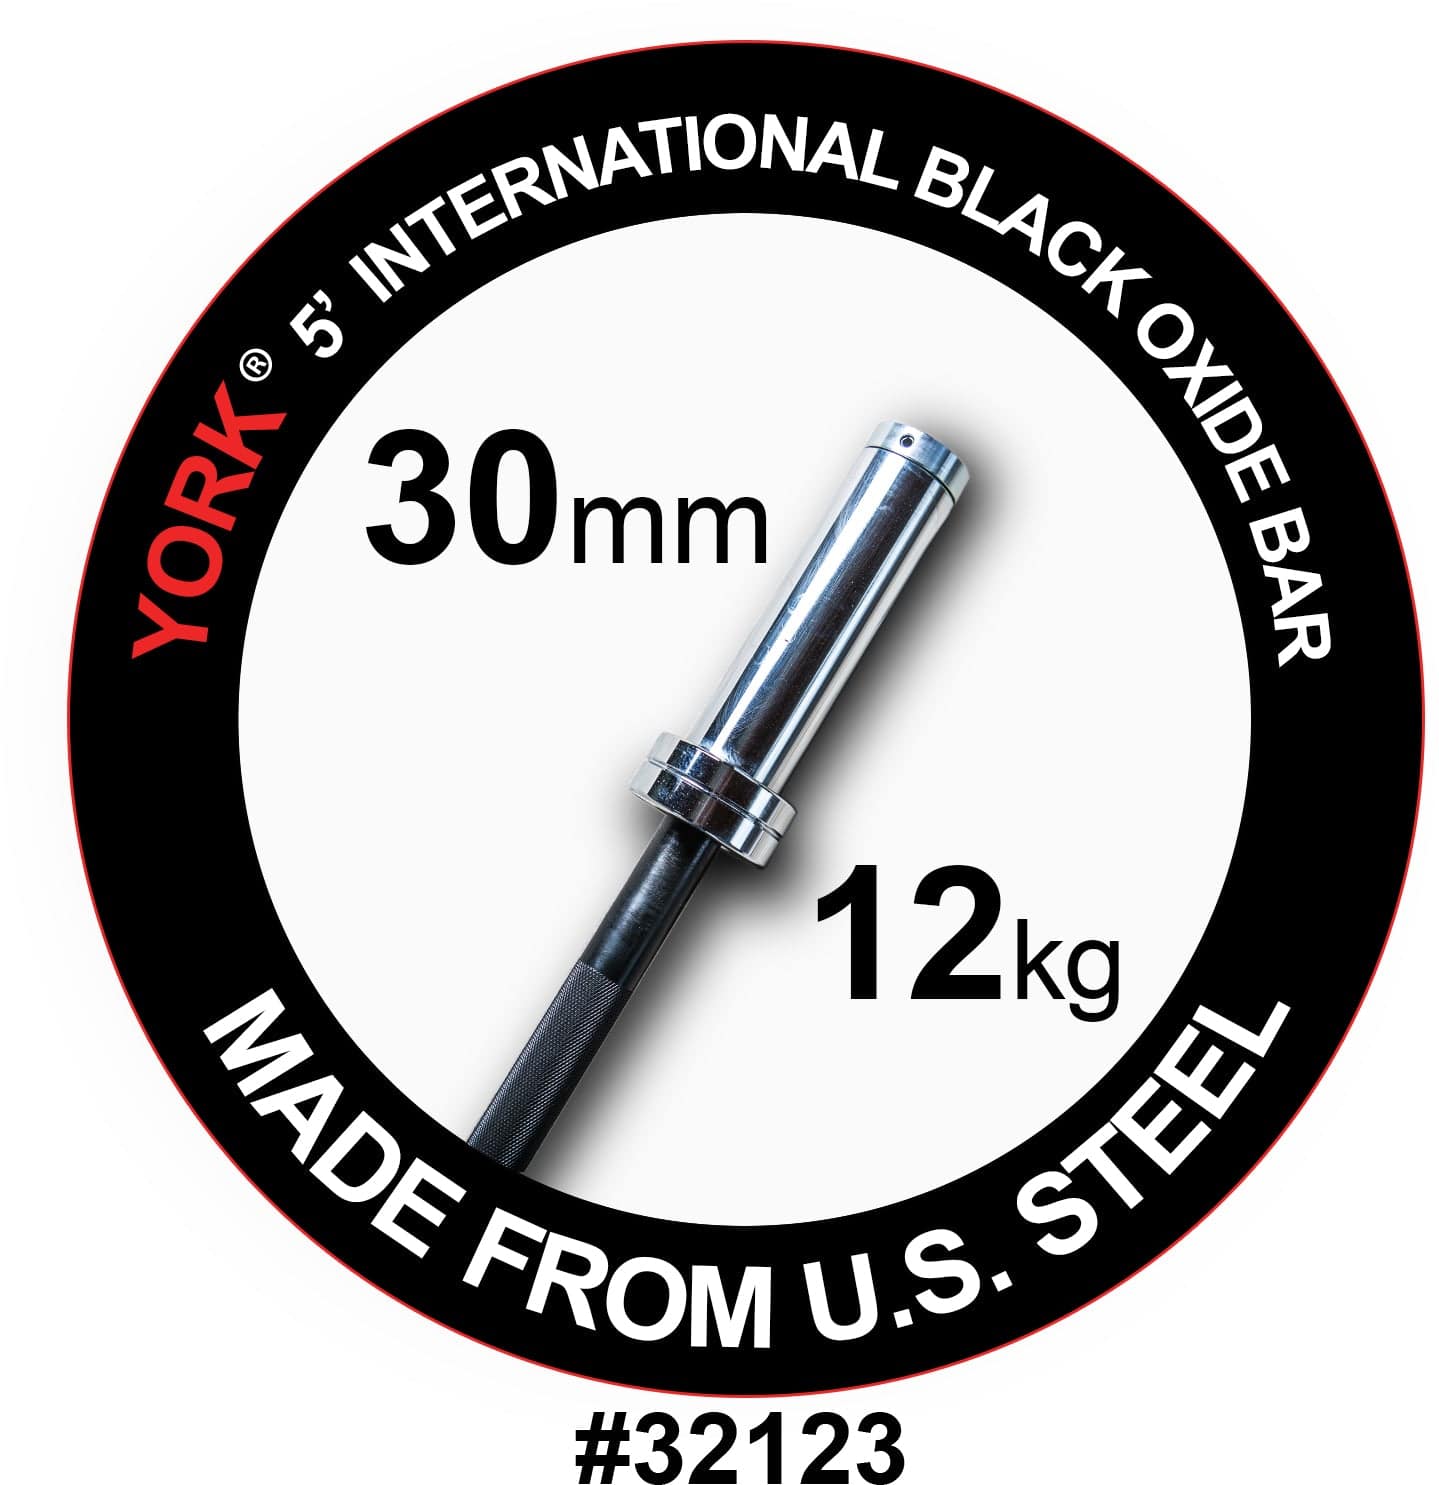 York Barbell | International Black Oxide Bar - 5ft (30mm) - XTC Fitness - Exercise Equipment Superstore - Canada - Multi-Purpose Barbell